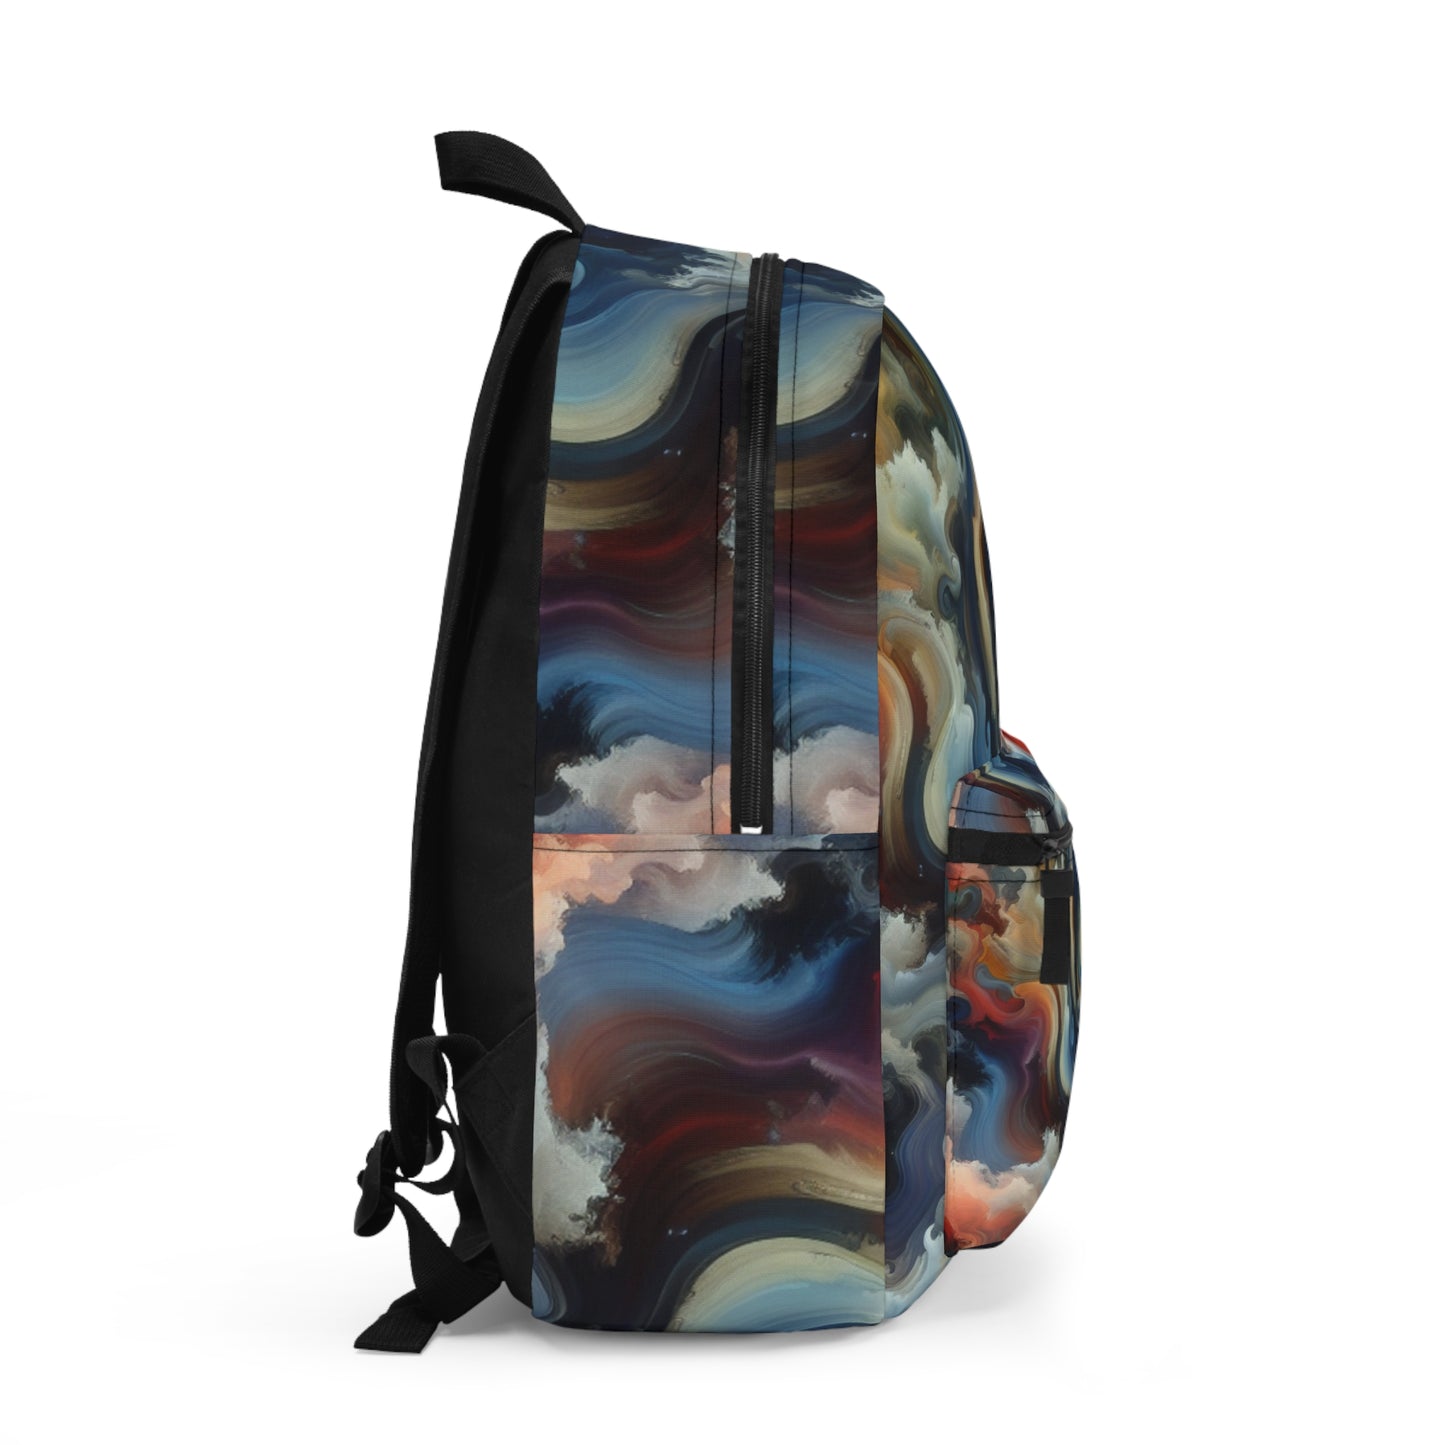 "Chaotic Balance: A Universe of Color" - The Alien Backpack Abstract Art Style